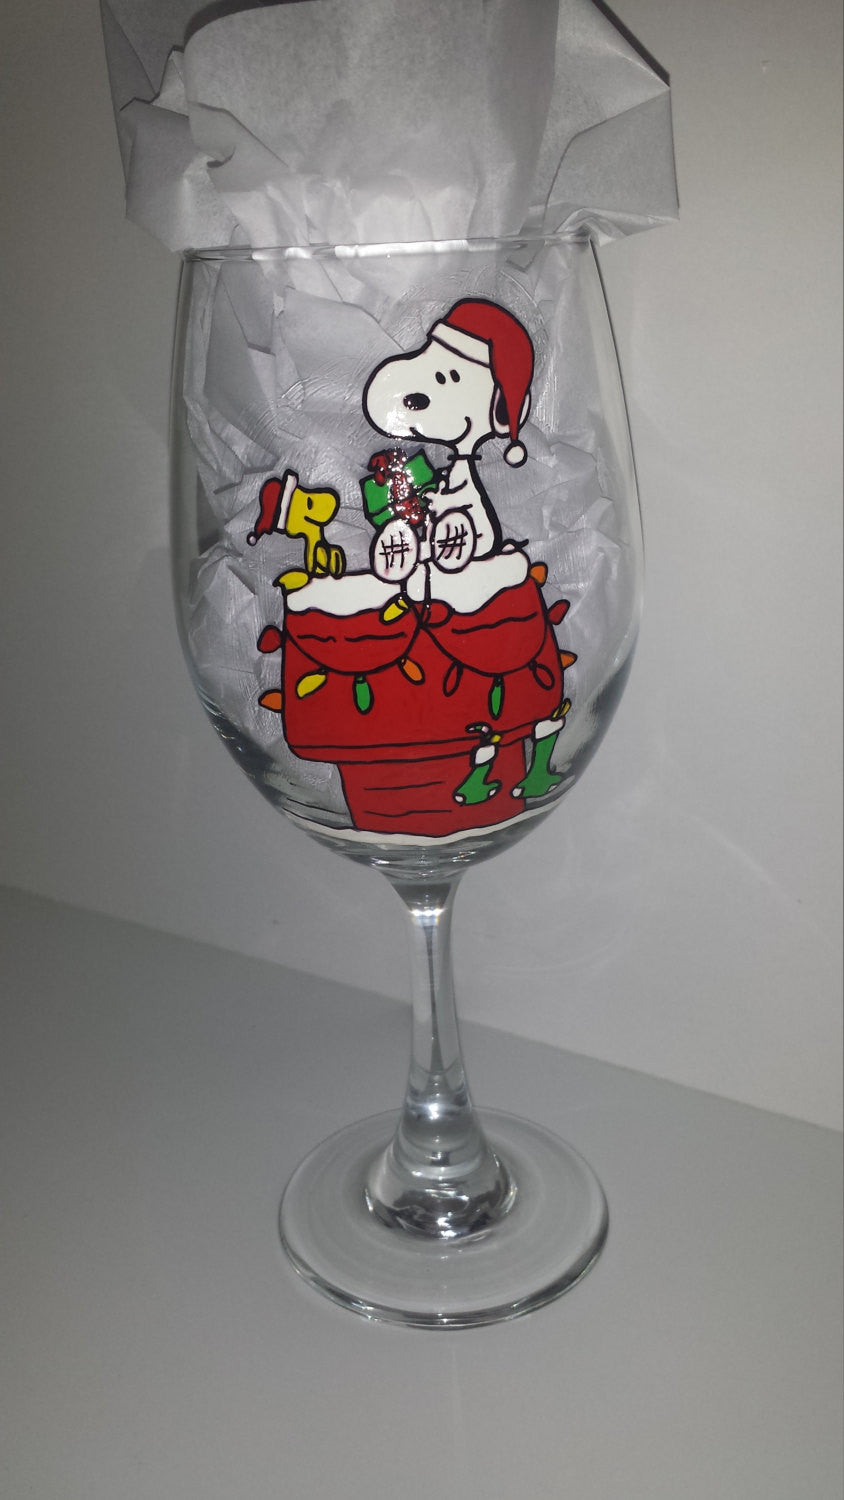 Snoopy Glass / Snoopy Wine Glass / Snoopy Gift / Snoopy Birthday / Snoopy  Decor / Snoopy Decorations / Snoopy Dog House / Peanuts Gang 